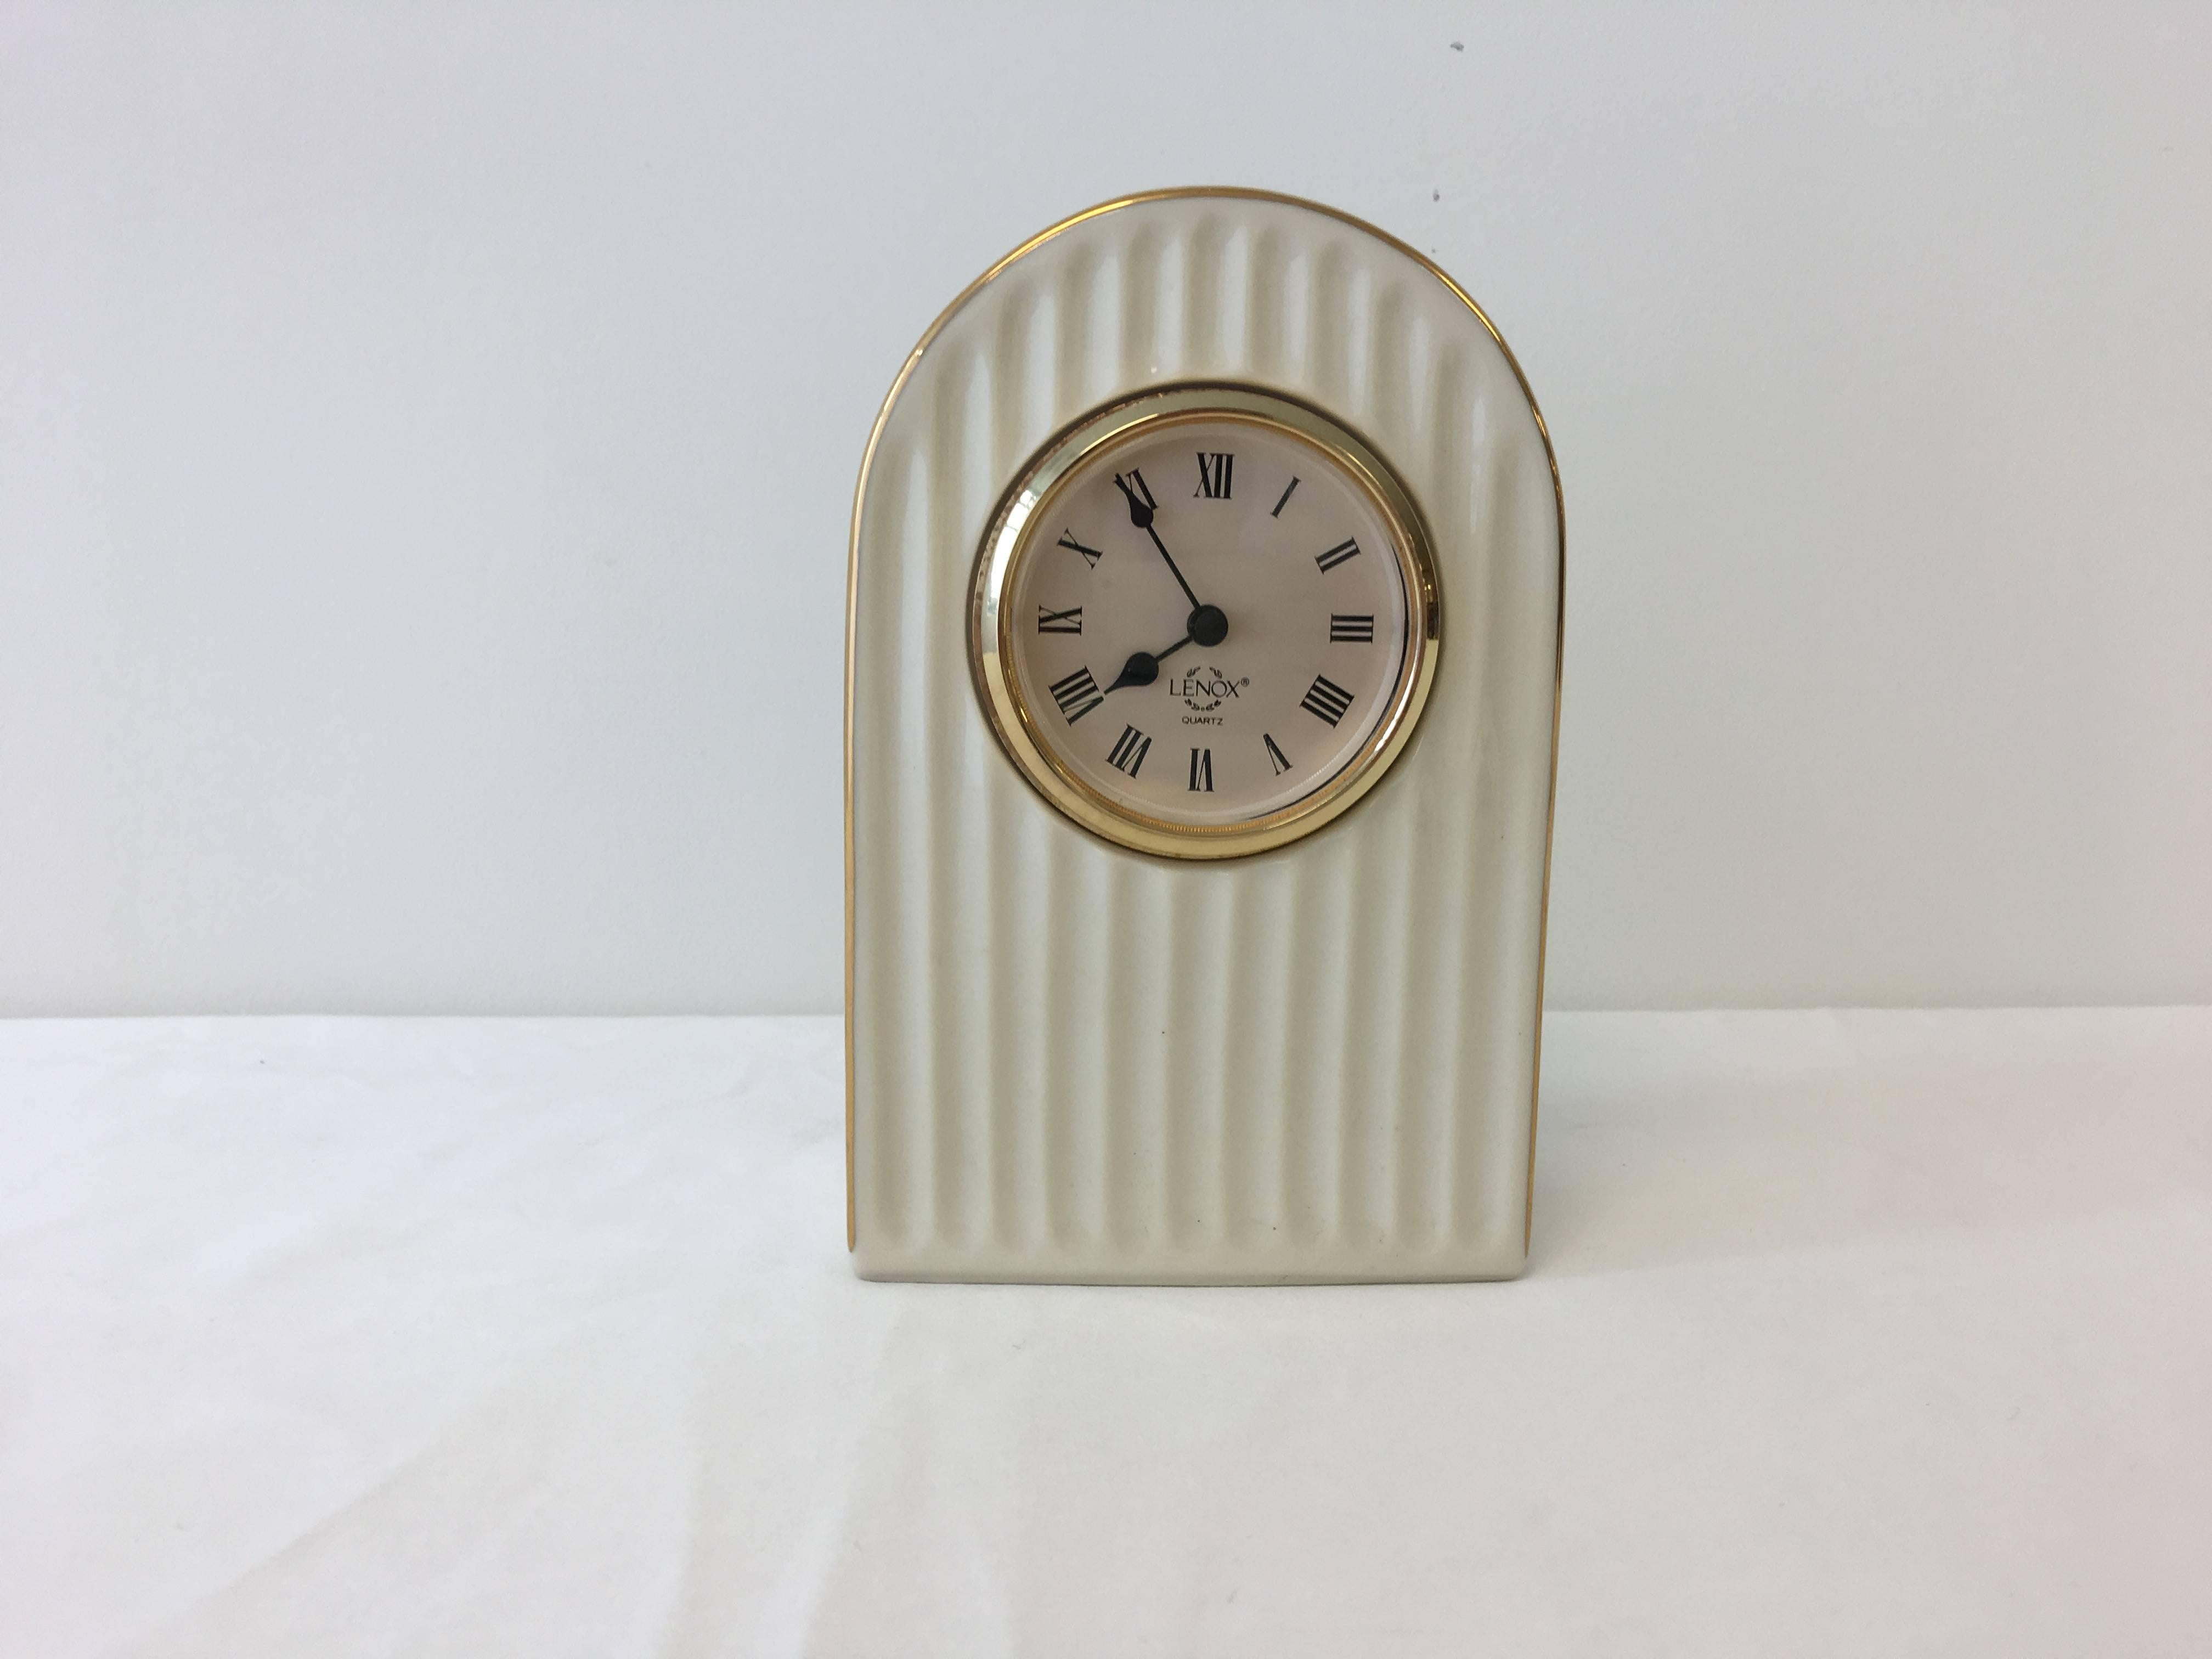 Offered is a beautiful, 20th century Lenox clock. Porcelain in an ivory color, with 24-karat gold trim. Represents an Art Deco style. Battery operated, excellent working condition.